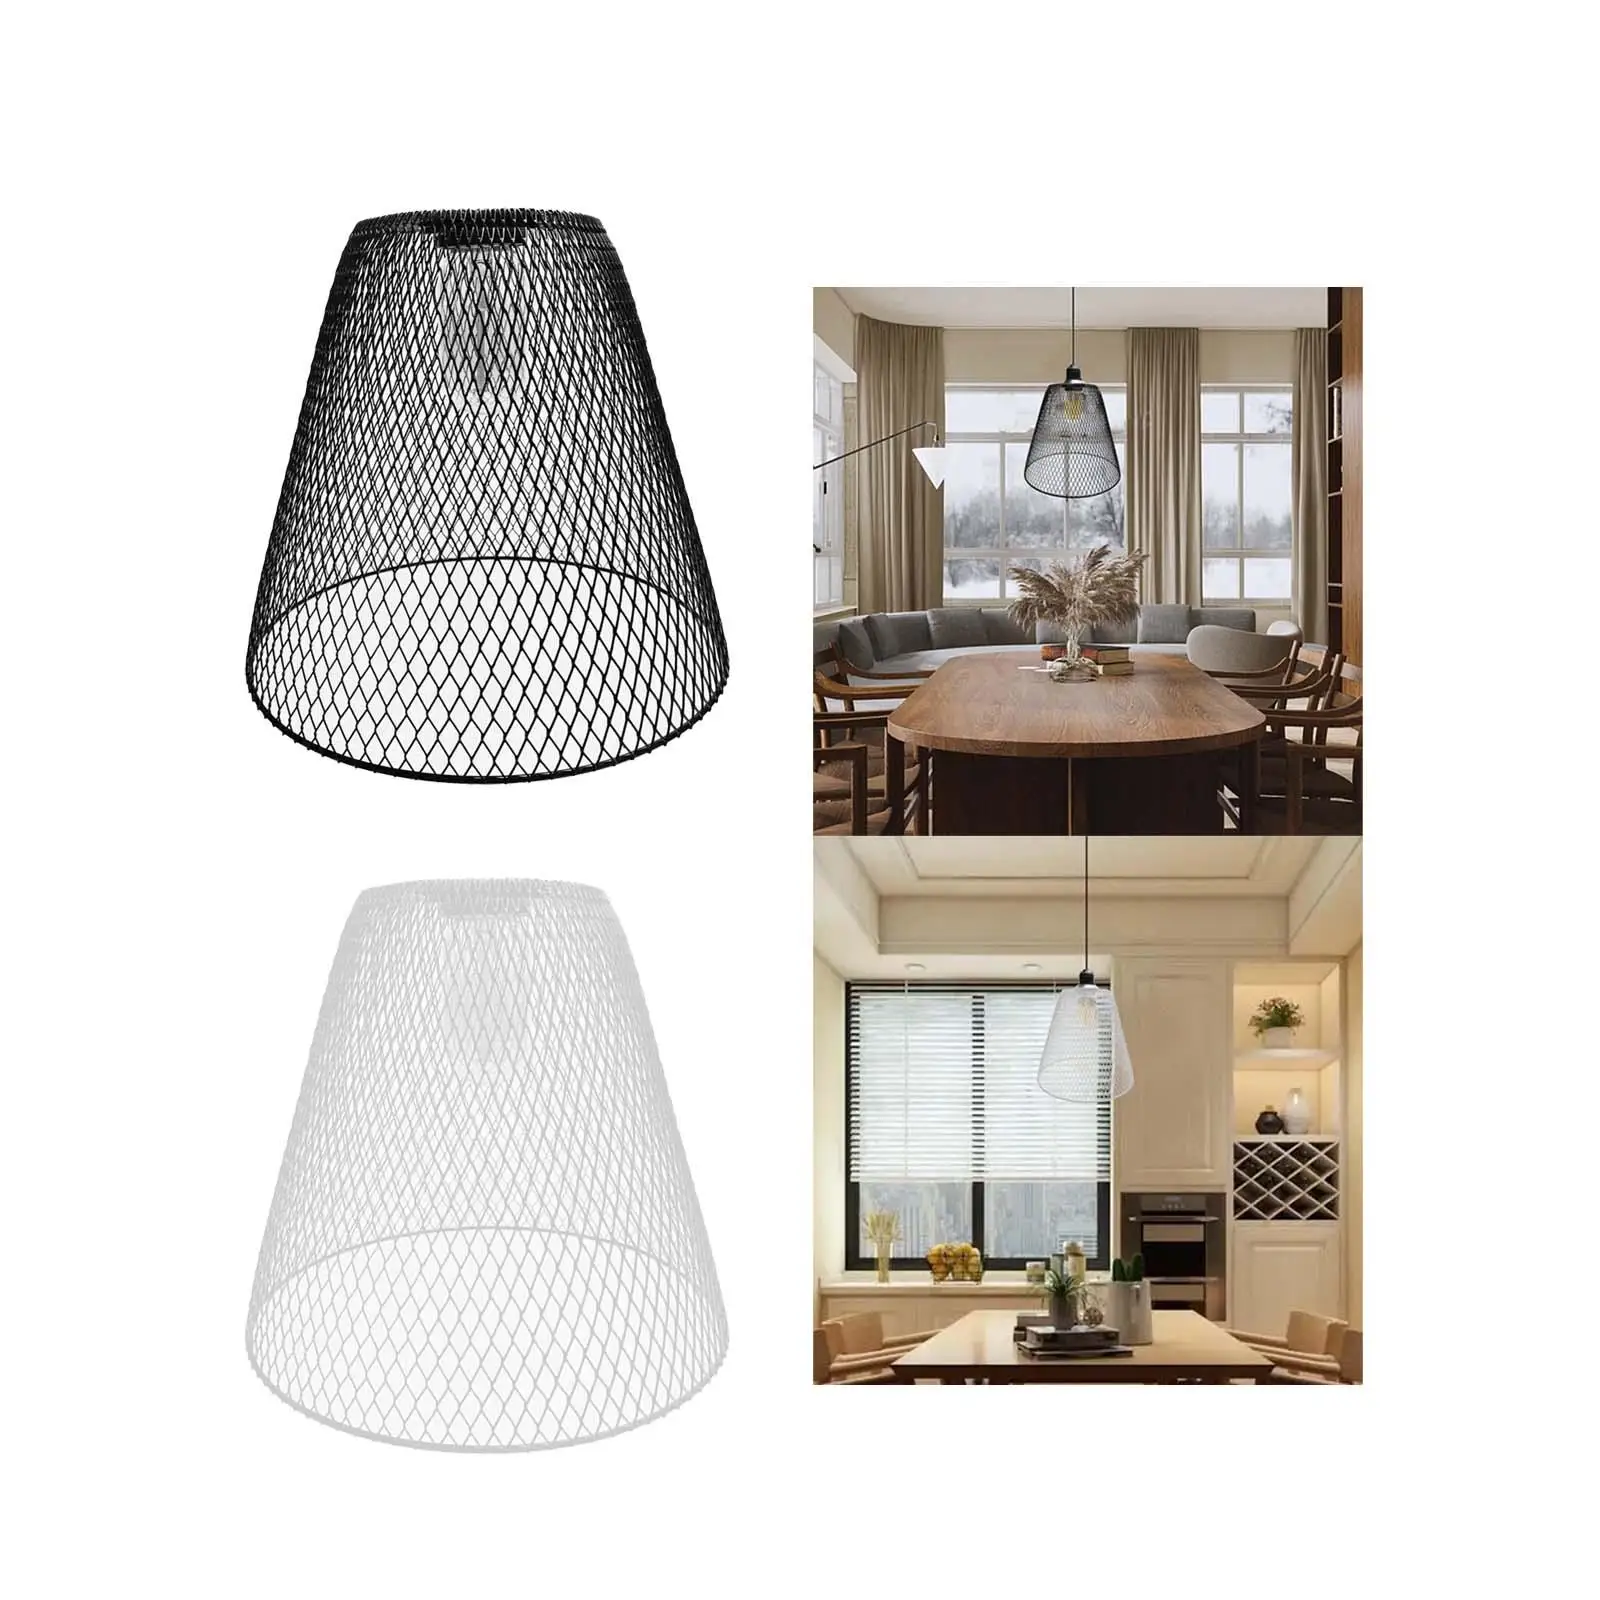 Pendant Lampshade Bulb Guard Cage Lamp Cover for Living Room Bedroom Dorm